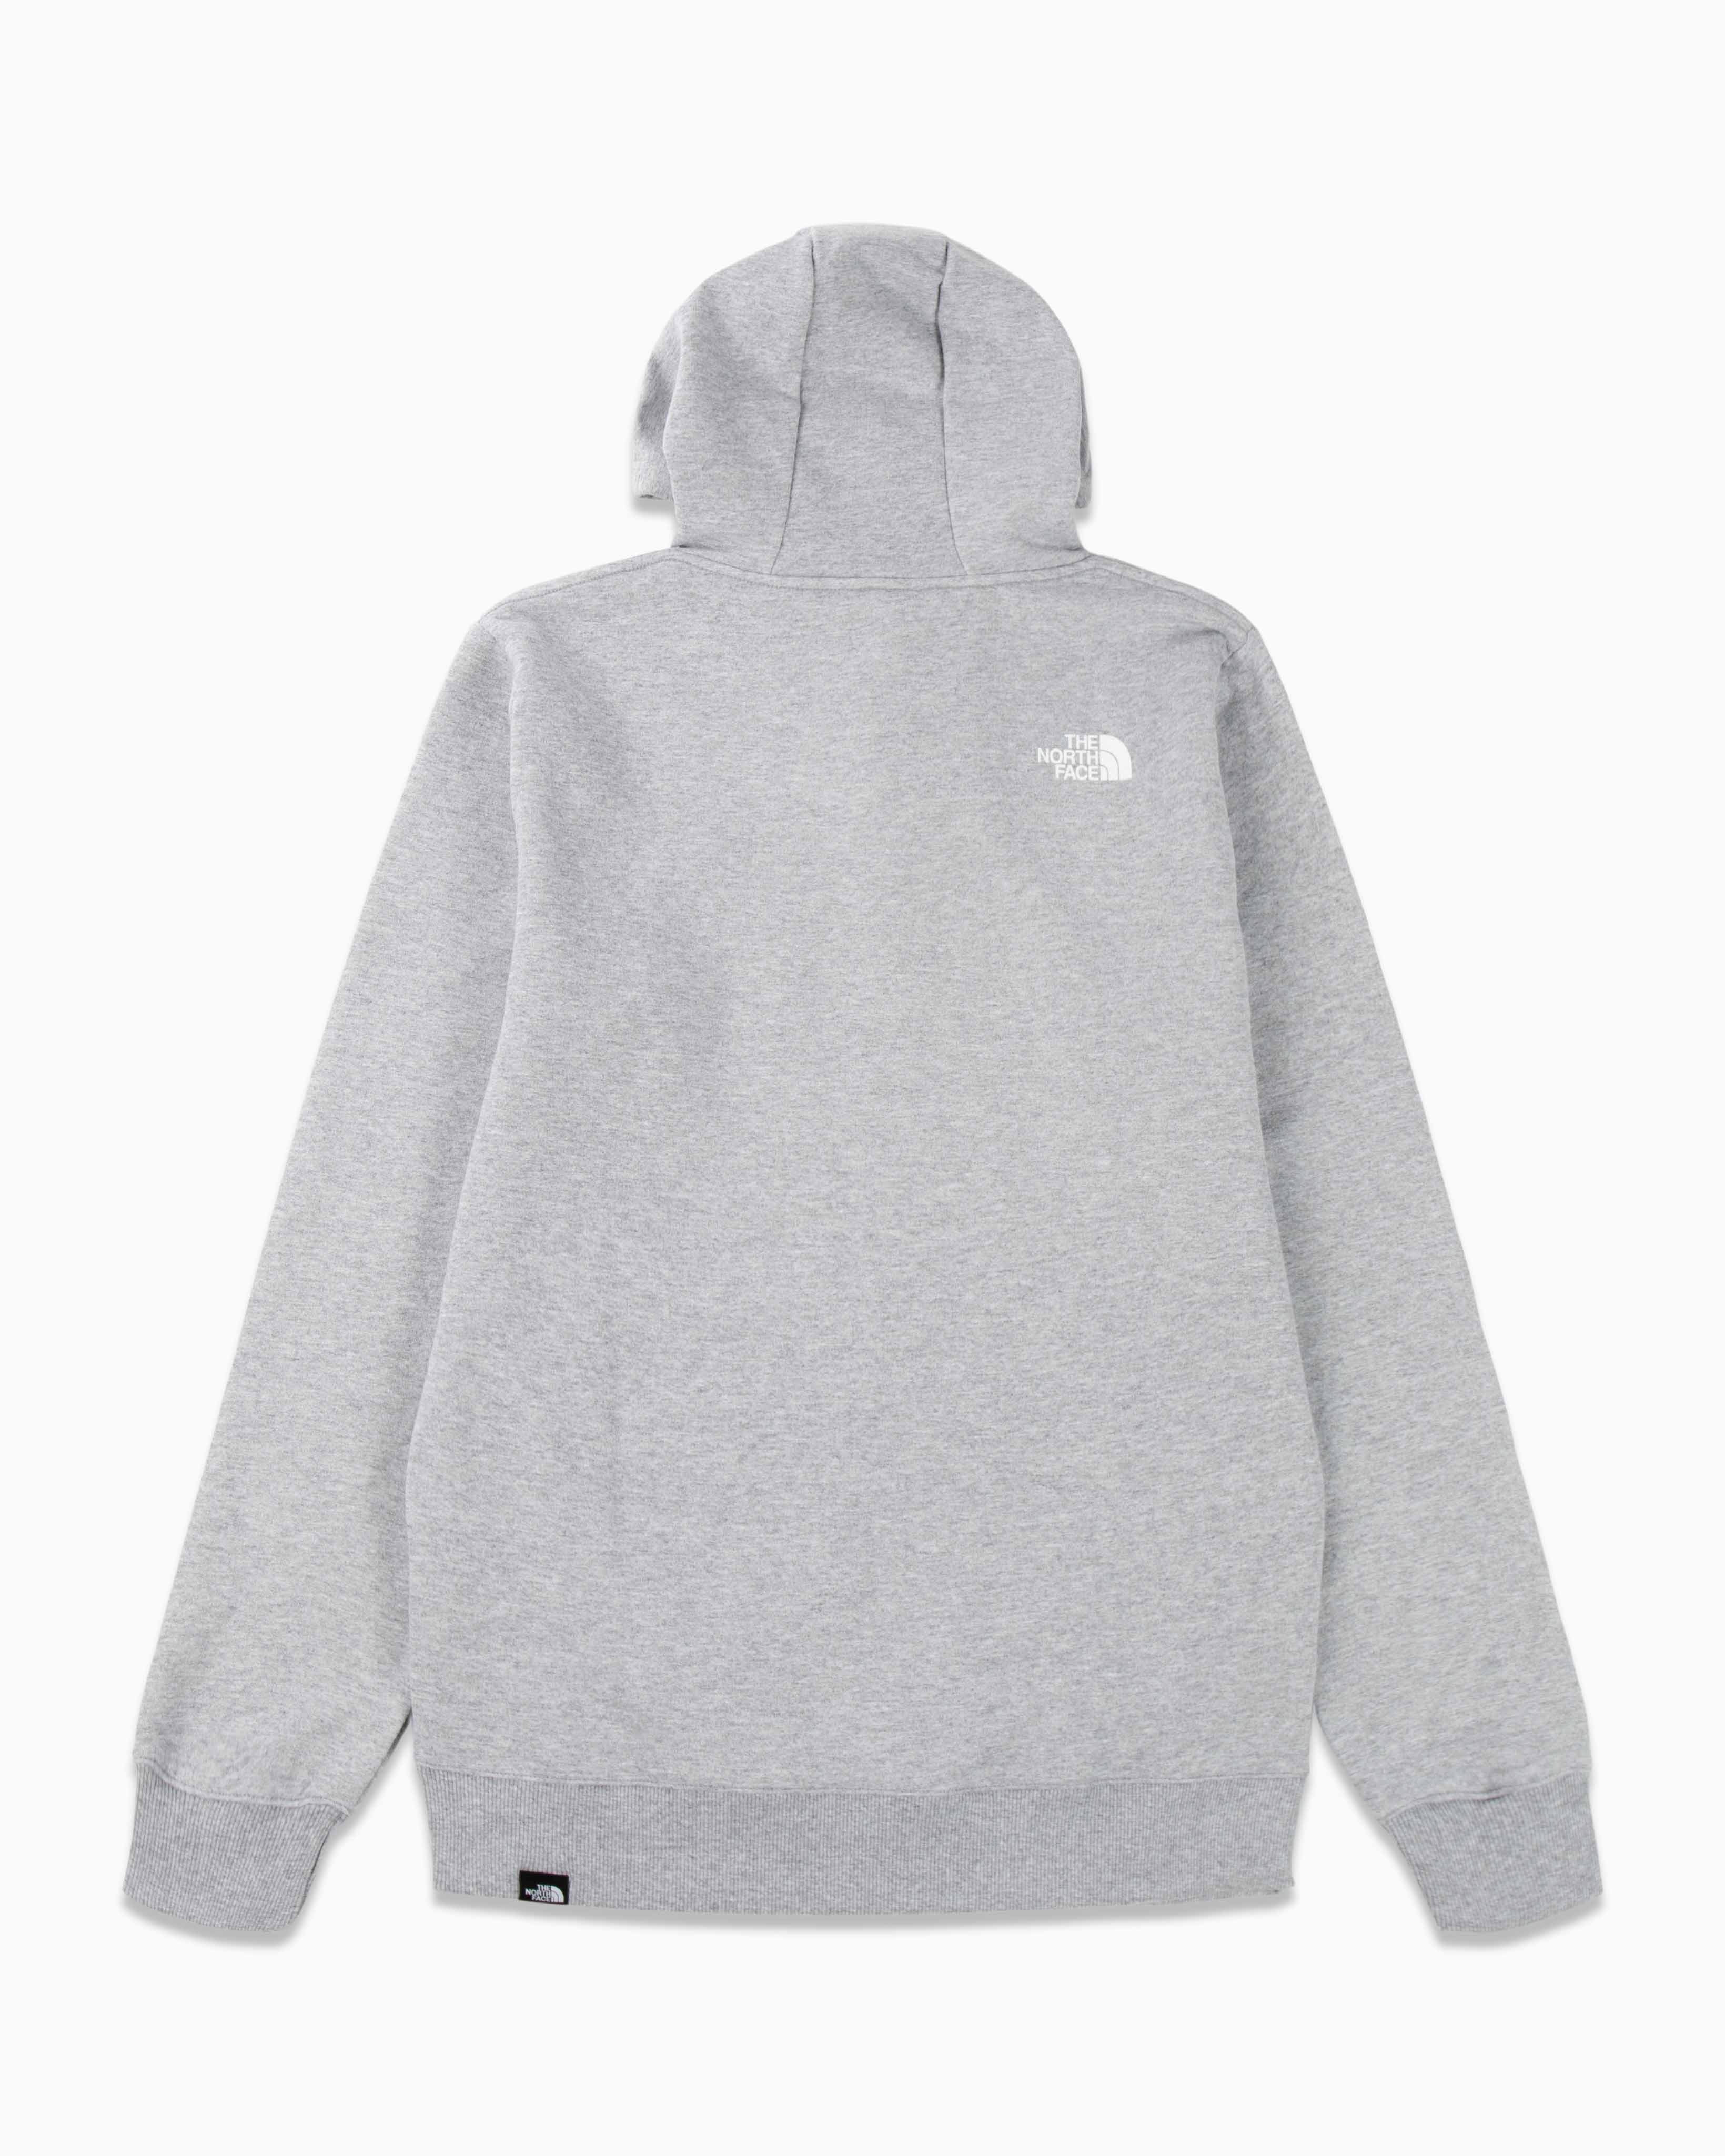 Cord Hoodie The North Face Outerwear Jackets Grey